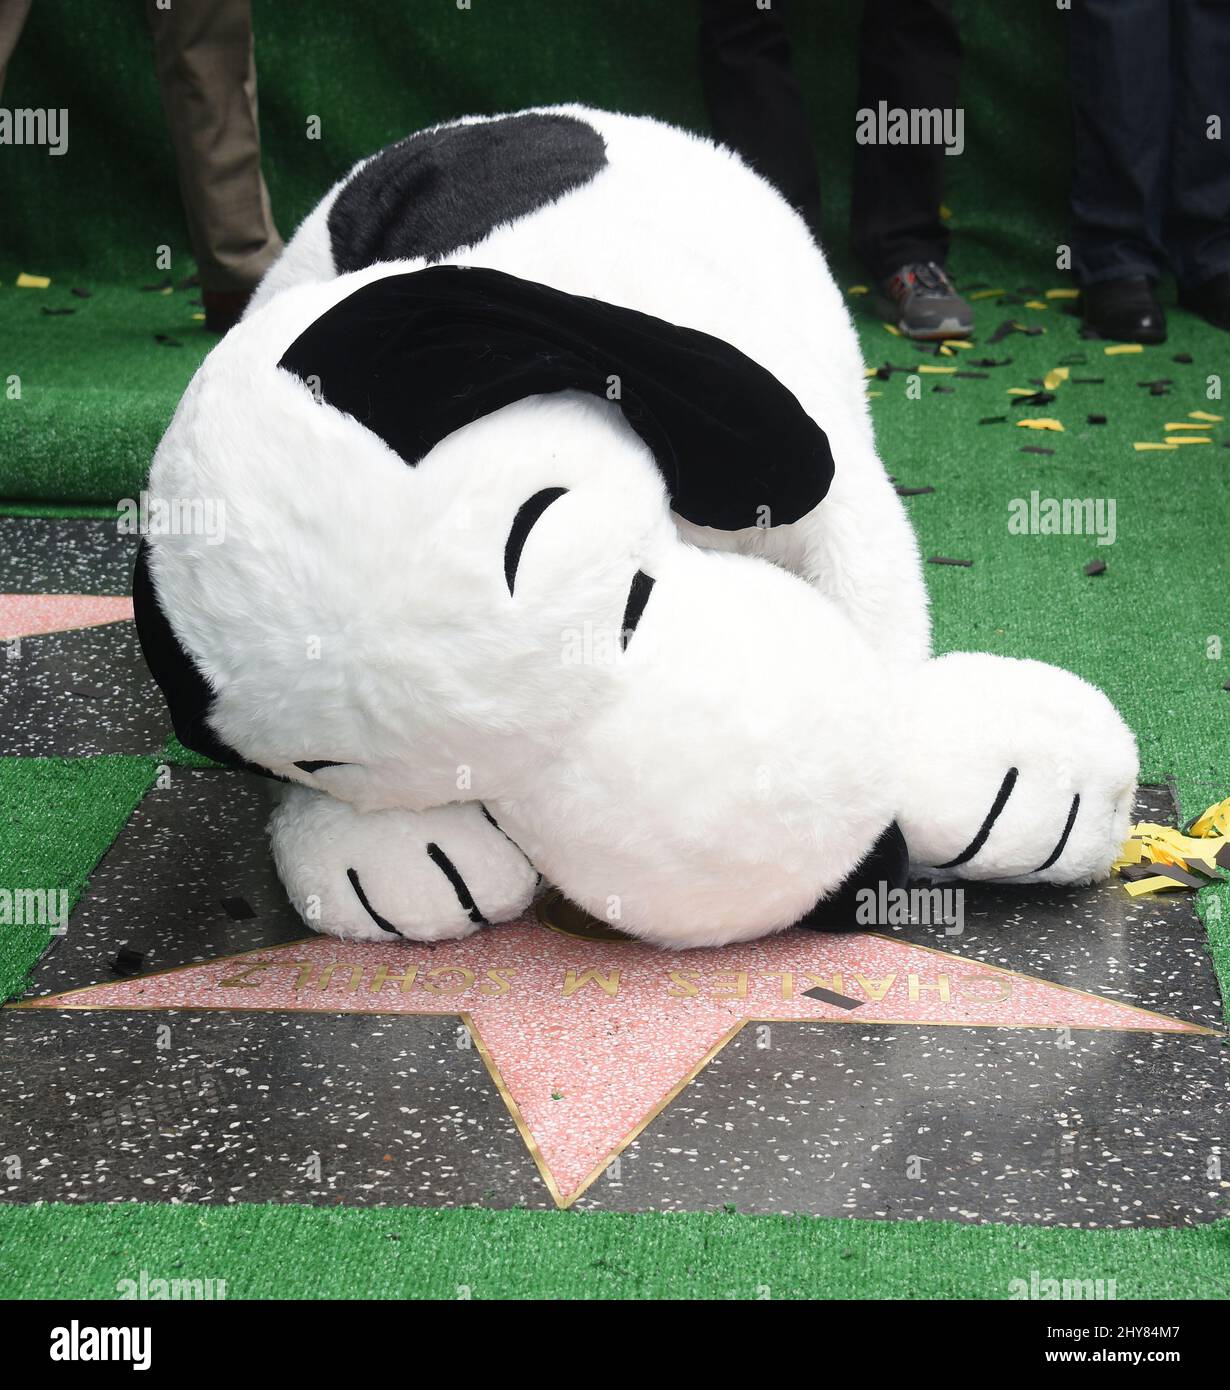 Snoopy's Star Snoopy Hollywood Walk of Fame Star Ceremony. Paying tribute to creator Charles M. Schulz' star. Stock Photo